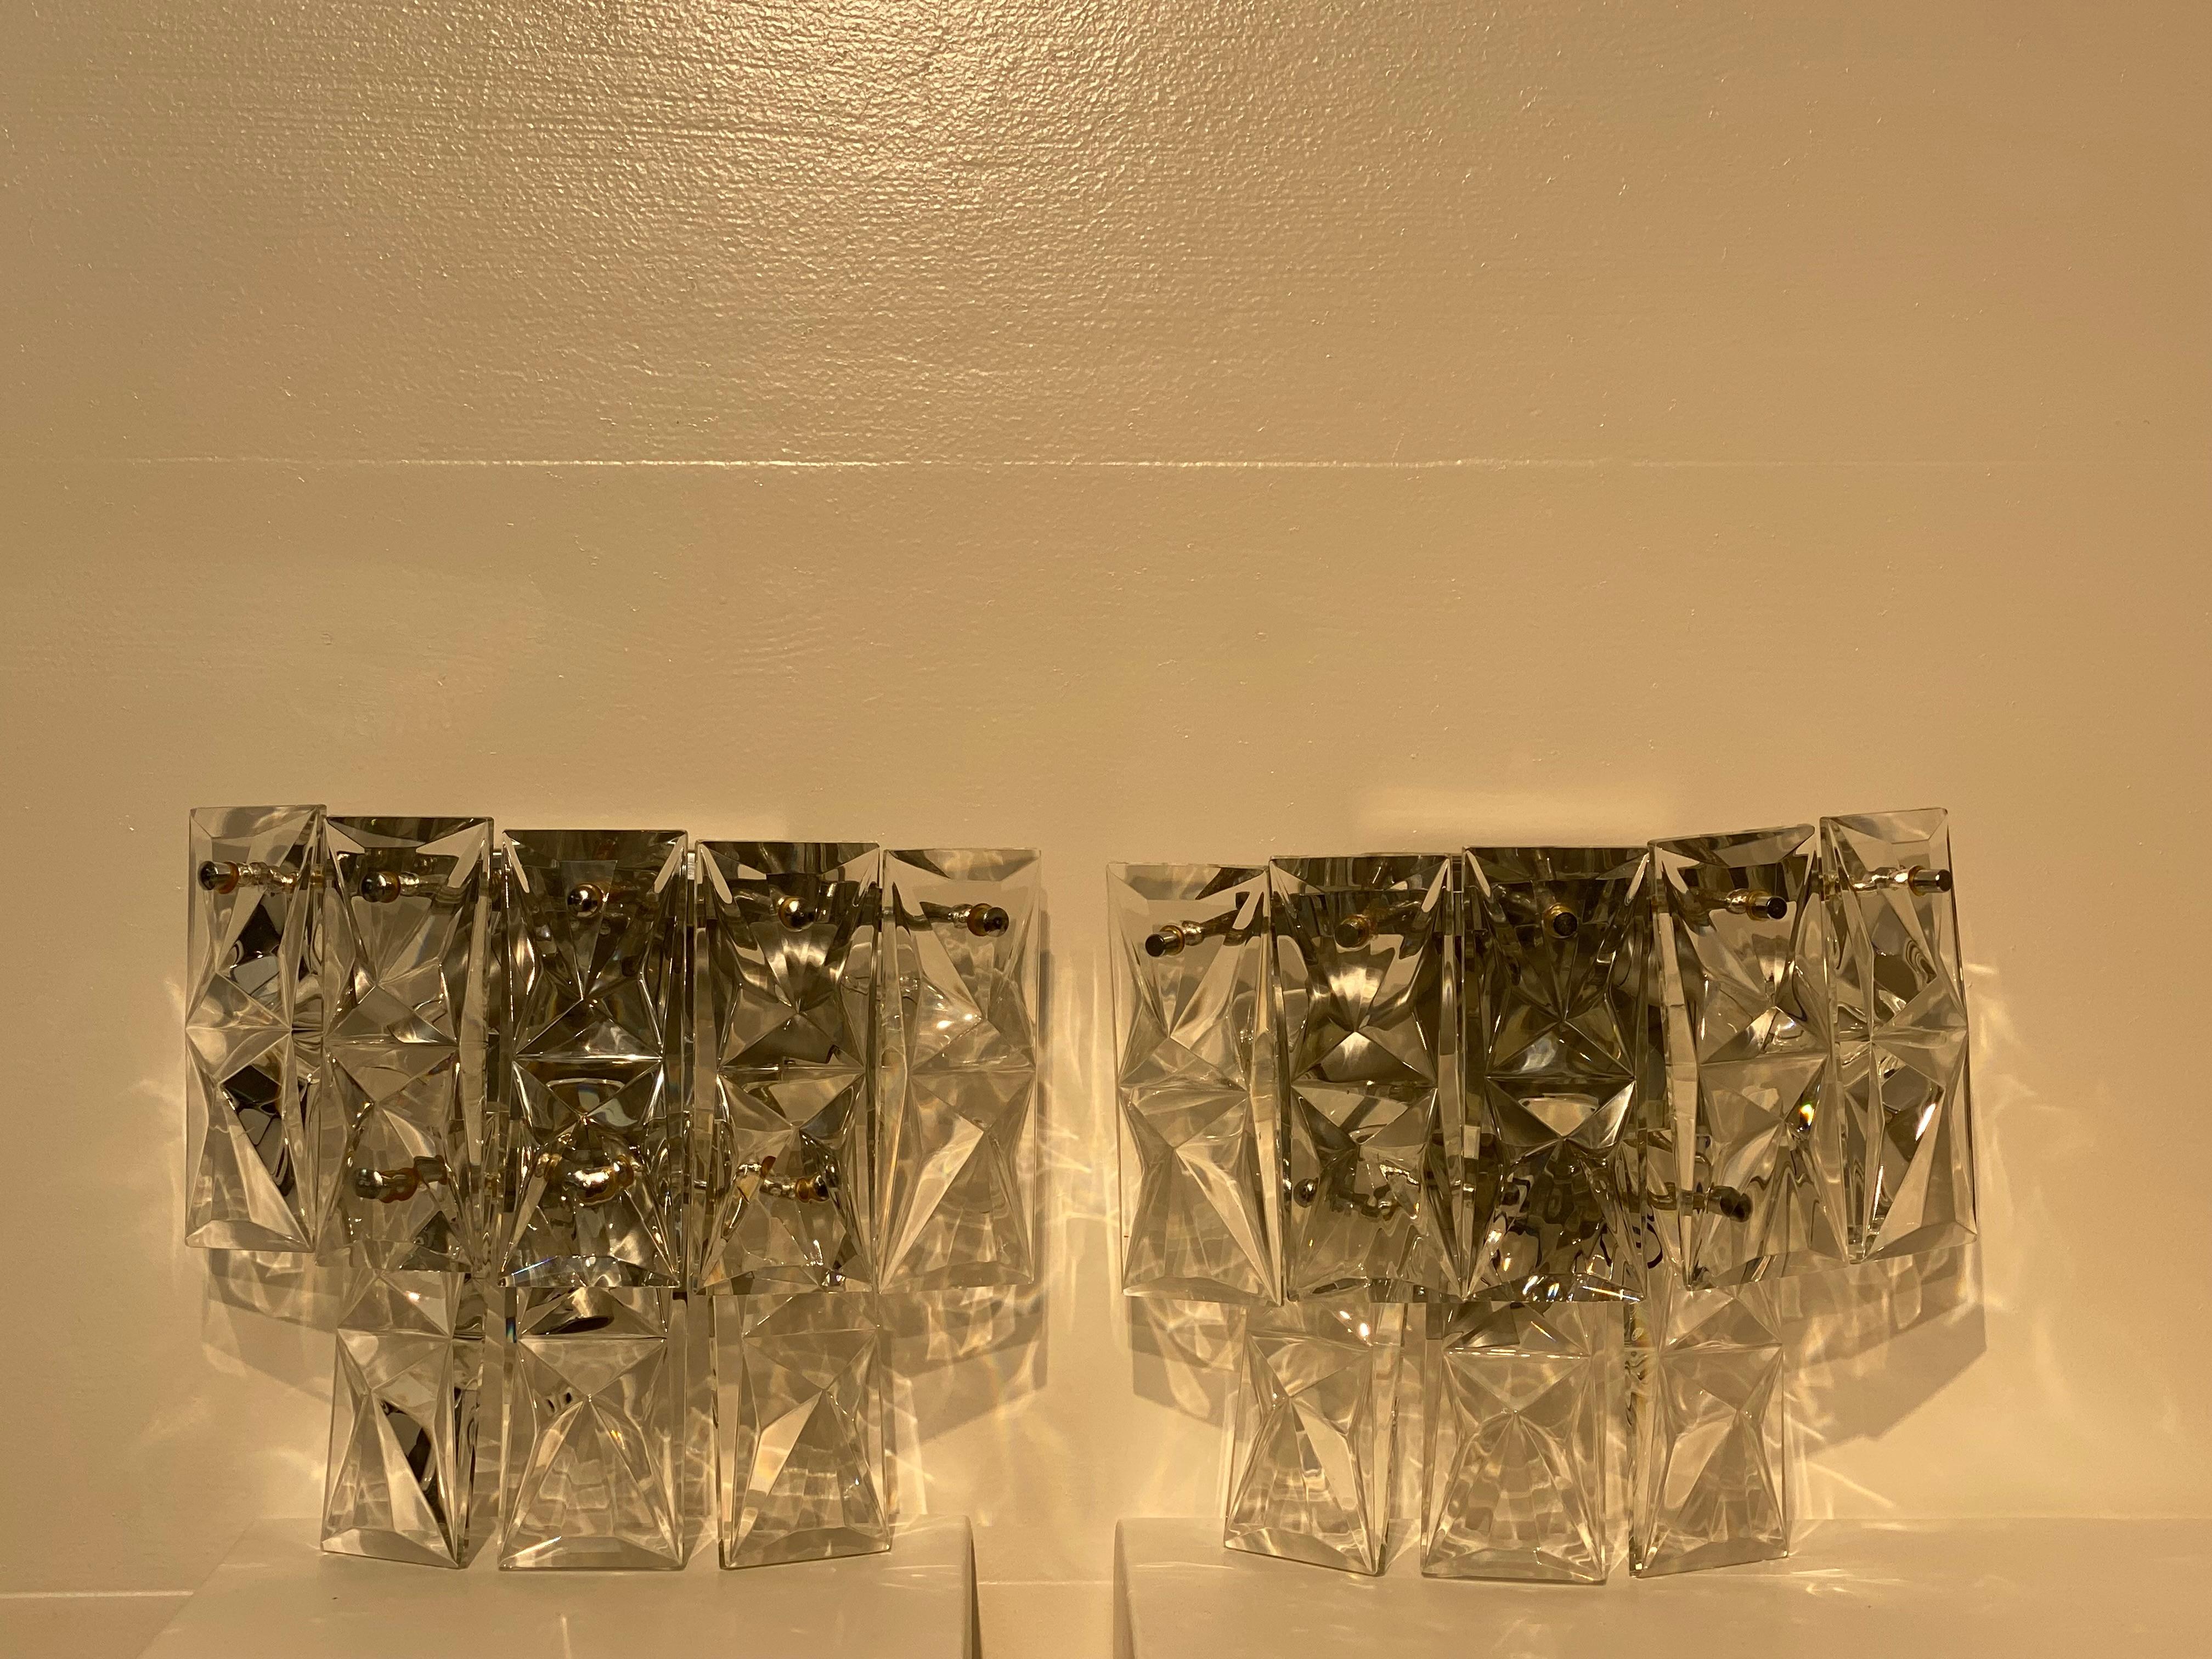 Elegant pair of Italian Wall Lamps,
from the 1960 ies,
made out of rectangular Crystal plates mounted on a Chrome base,
inside the lamps are 3 light points,
very decorative and refined pair of lamps,
the radiance of the Crystal gives a magic